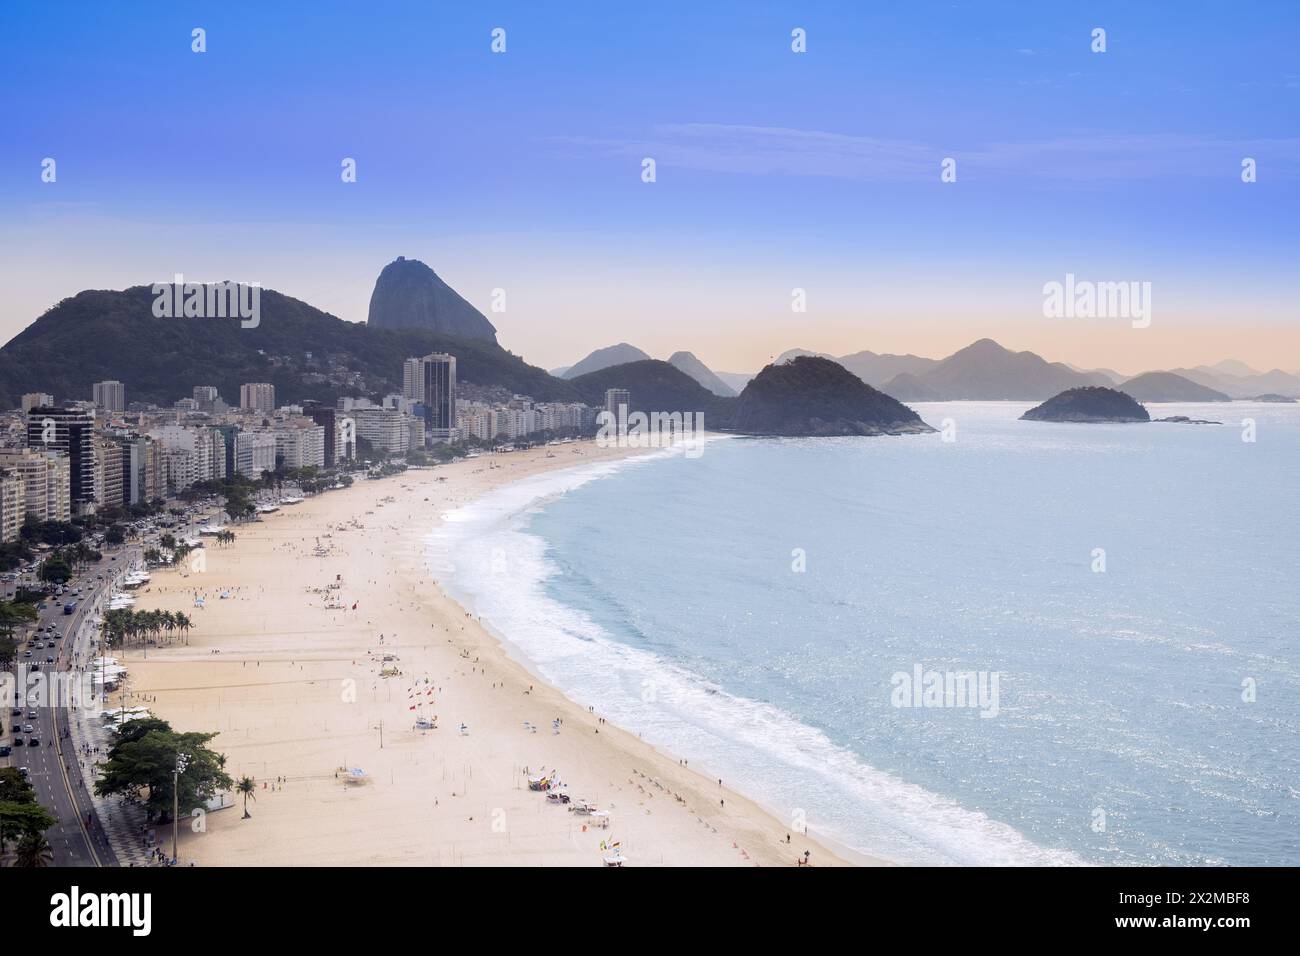 Geografie / Reise, Brasilien, Rio de Janeiro, ADDITIONAL-RIGHTS-CLEARANCE-INFO-NOT-AVAILABLE Stockfoto